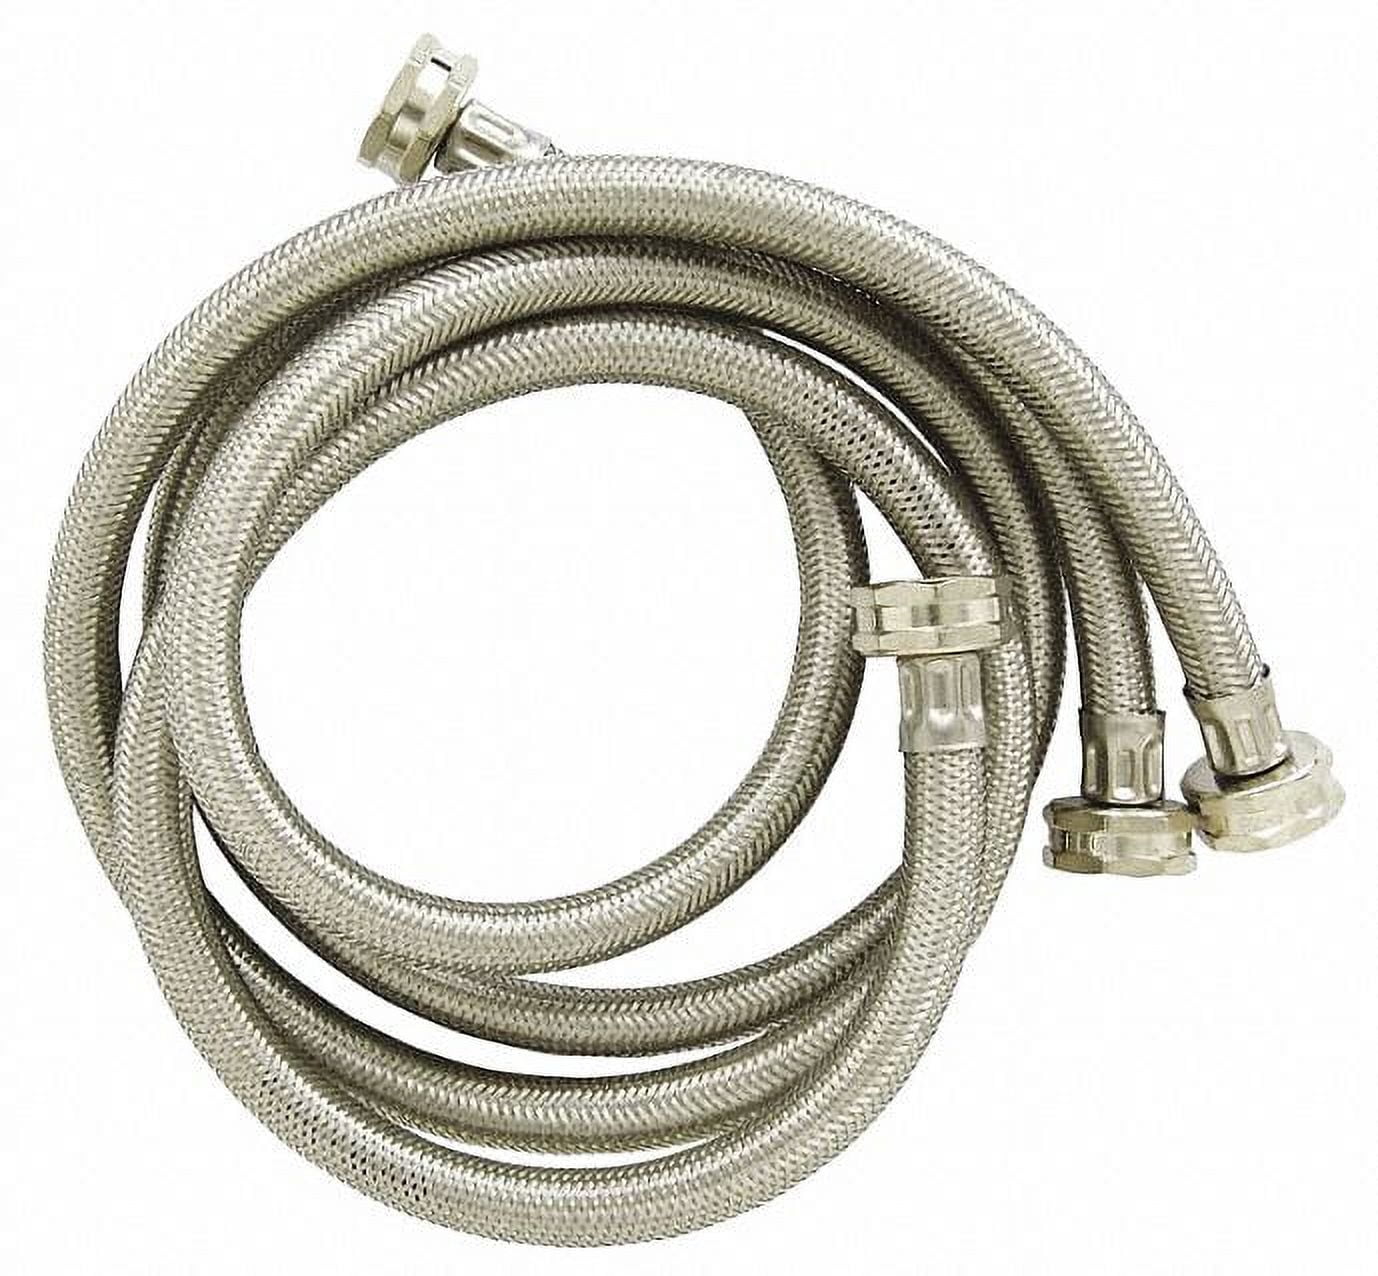 HQRP Universal Premium Braided Stainless Steel Refrigerator/Ice Maker Hose  with 1/4 Comp by 1/4 Comp Connection, 6-ft Burst Proof Water Supply Line  